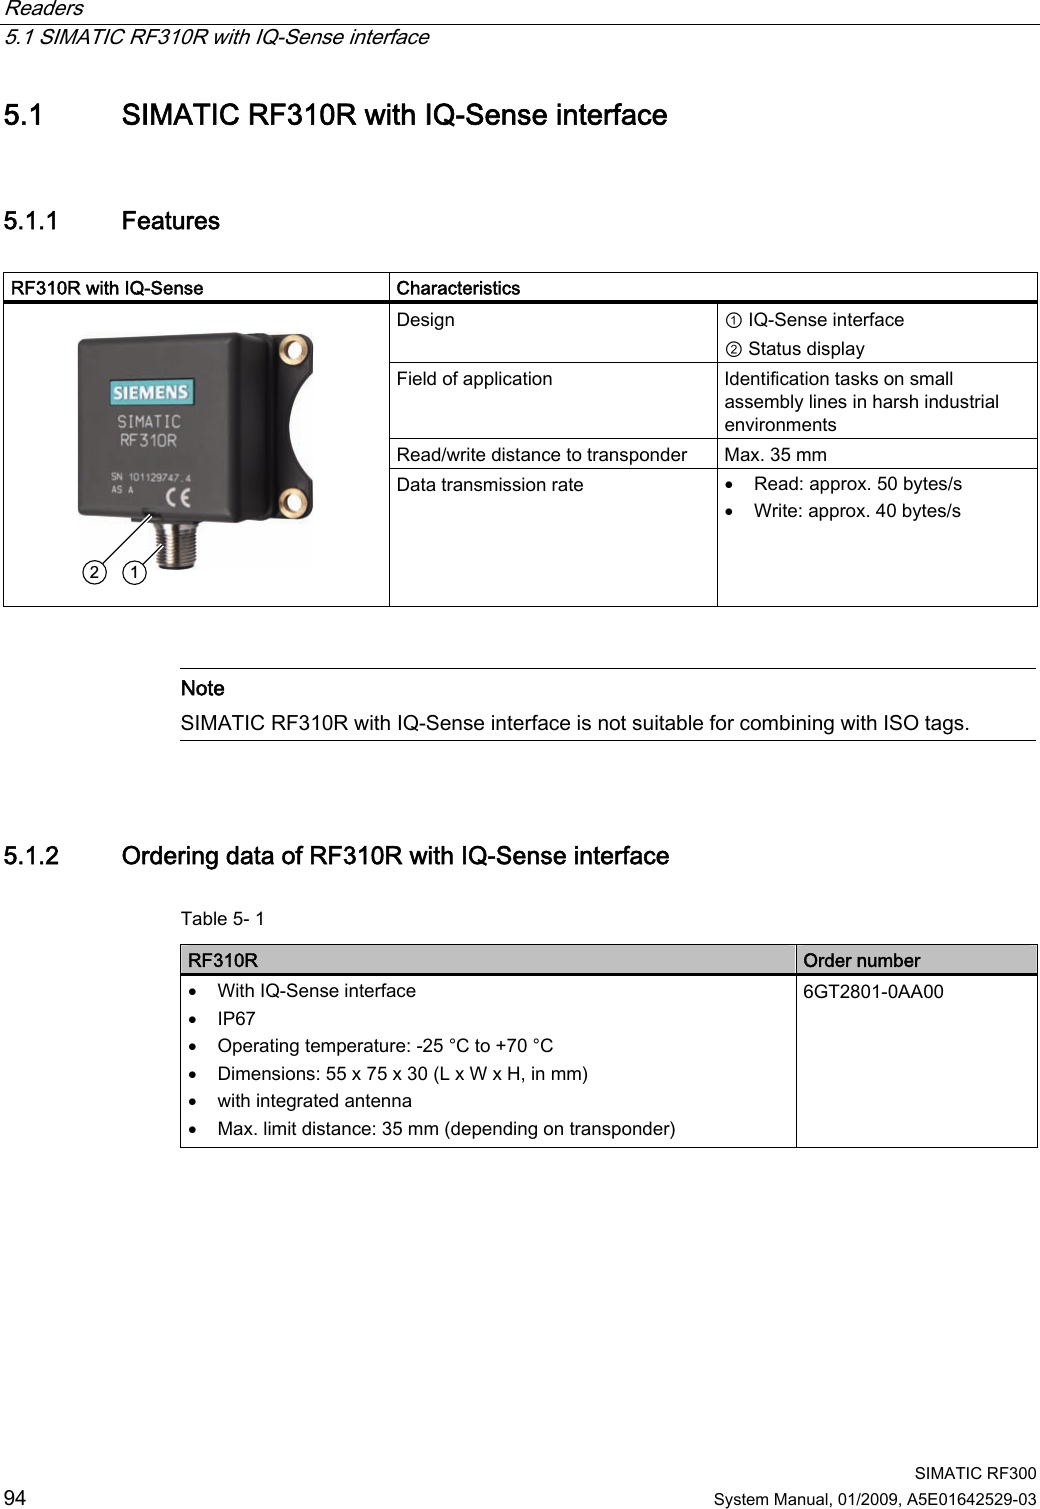 Readers   5.1 SIMATIC RF310R with IQ-Sense interface  SIMATIC RF300 94 System Manual, 01/2009, A5E01642529-03 5.1 SIMATIC RF310R with IQ-Sense interface 5.1.1 Features  RF310R with IQ-Sense     Characteristics Design  ① IQ-Sense interface ② Status display Field of application  Identification tasks on small assembly lines in harsh industrial environments Read/write distance to transponder  Max. 35 mm    Data transmission rate  • Read: approx. 50 bytes/s • Write: approx. 40 bytes/s    Note SIMATIC RF310R with IQ-Sense interface is not suitable for combining with ISO tags.  5.1.2 Ordering data of RF310R with IQ-Sense interface Table 5- 1      RF310R  Order number • With IQ-Sense interface • IP67 • Operating temperature: -25 °C to +70 °C • Dimensions: 55 x 75 x 30 (L x W x H, in mm) • with integrated antenna • Max. limit distance: 35 mm (depending on transponder) 6GT2801-0AA00   